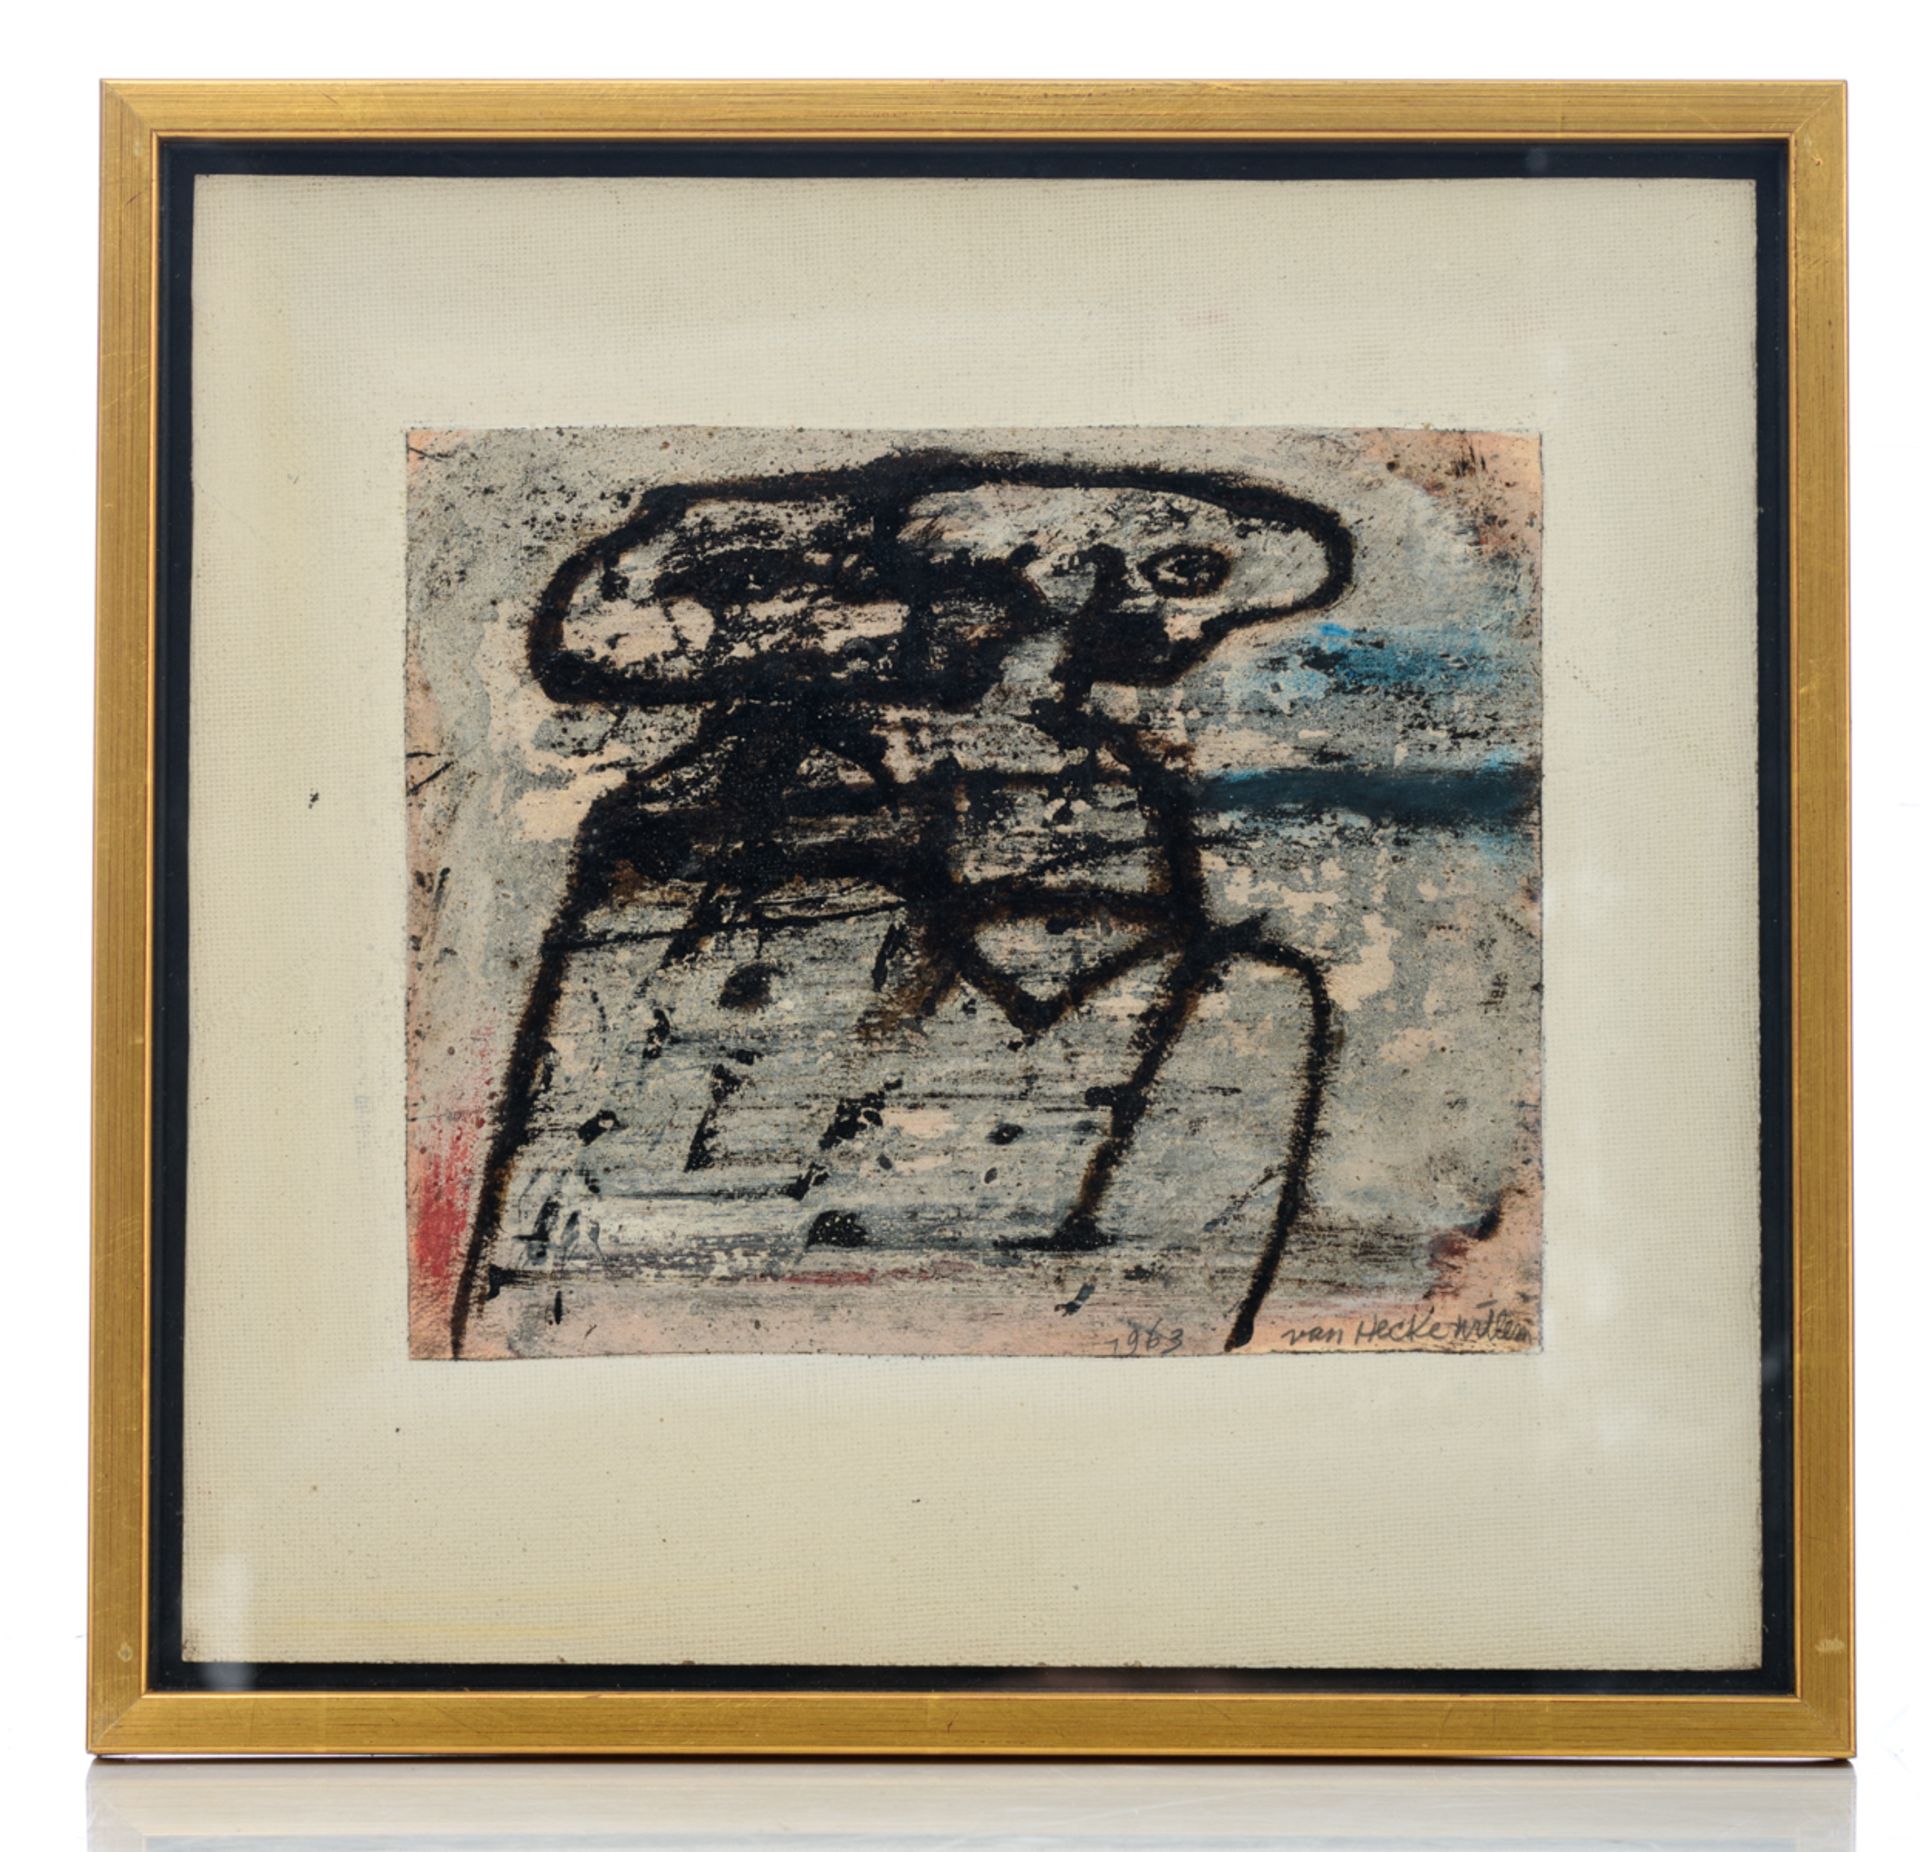 Van Hecke W., four untitled works, dated 1957, 1963, 1963 and 1964, mixed media, 34 x 40 - 40 x 45 c - Image 6 of 14